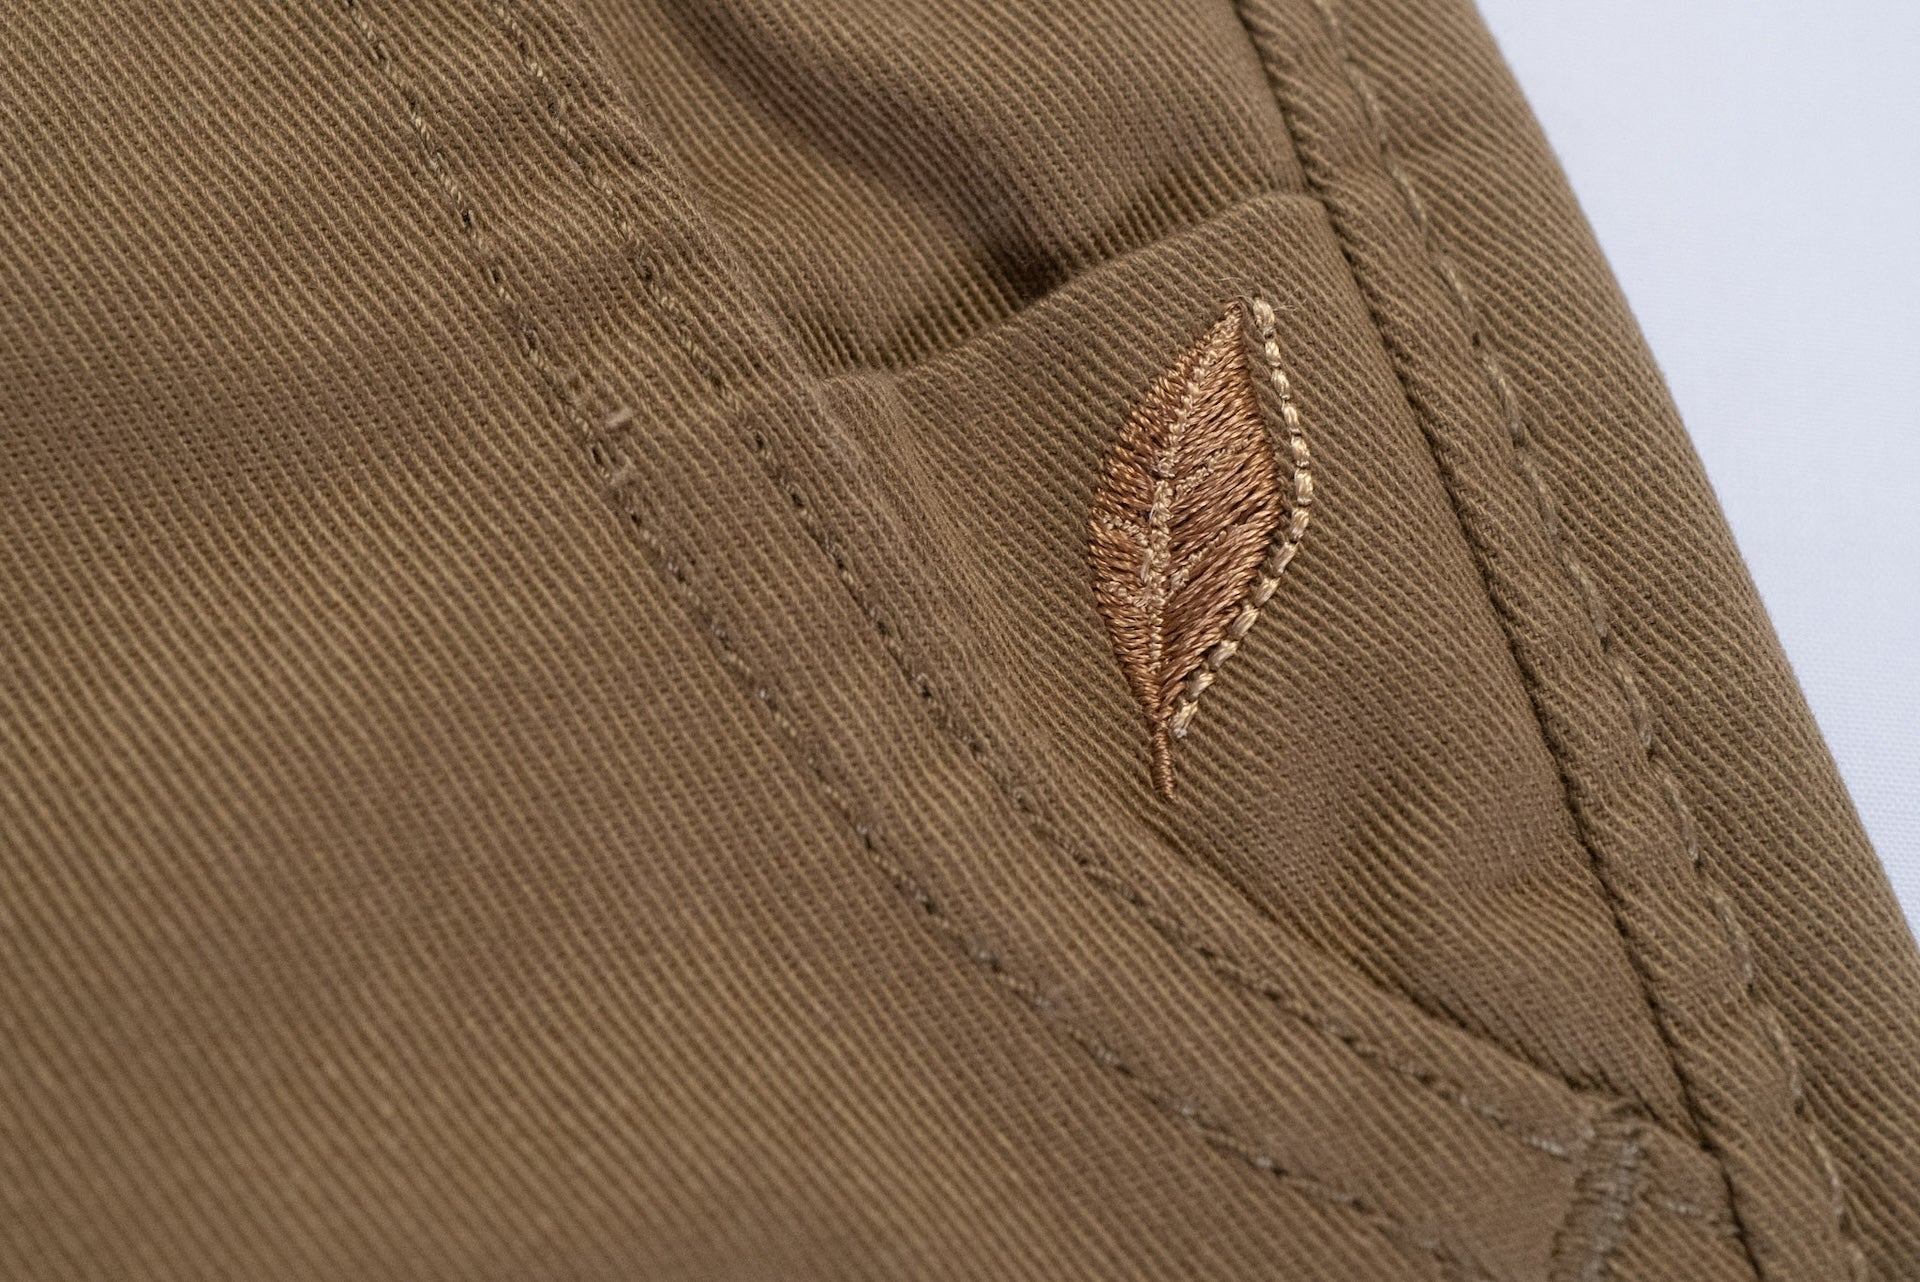 Pure Blue Japan 12oz High-Density "Worker's" Chinos (Camel)